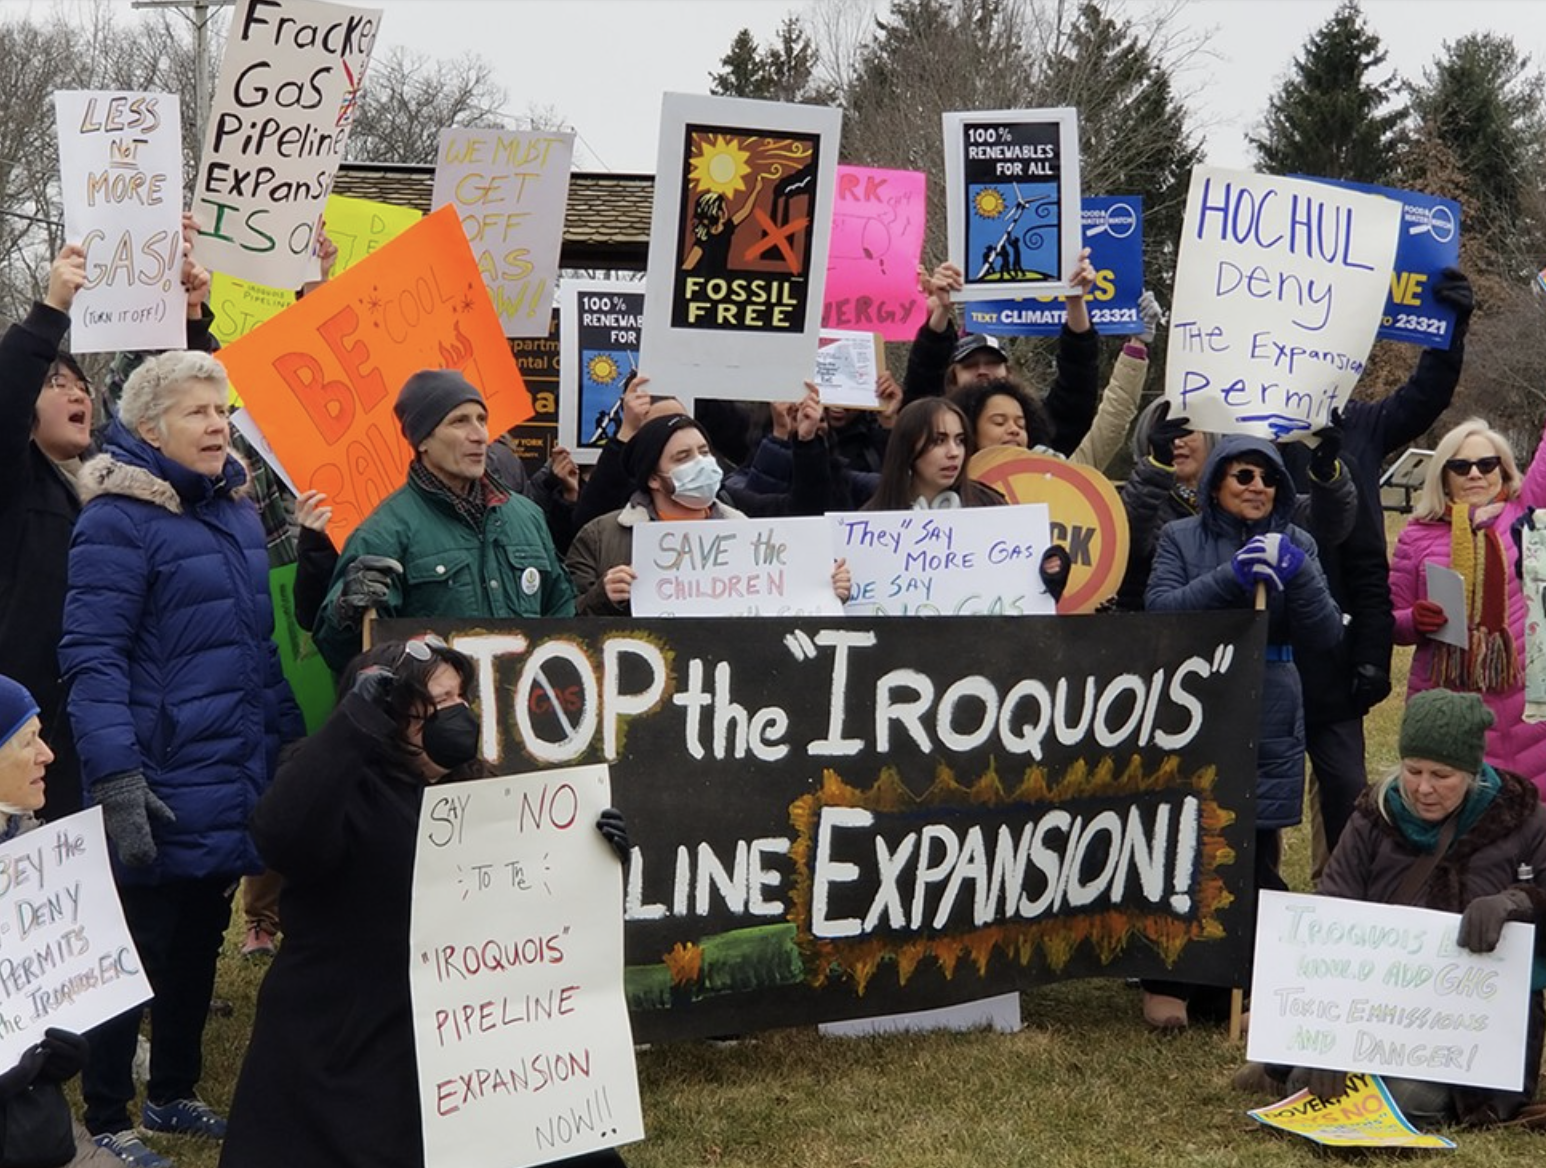 Dover, NY: Stop the Iroquois Pipeline Expansion Project!